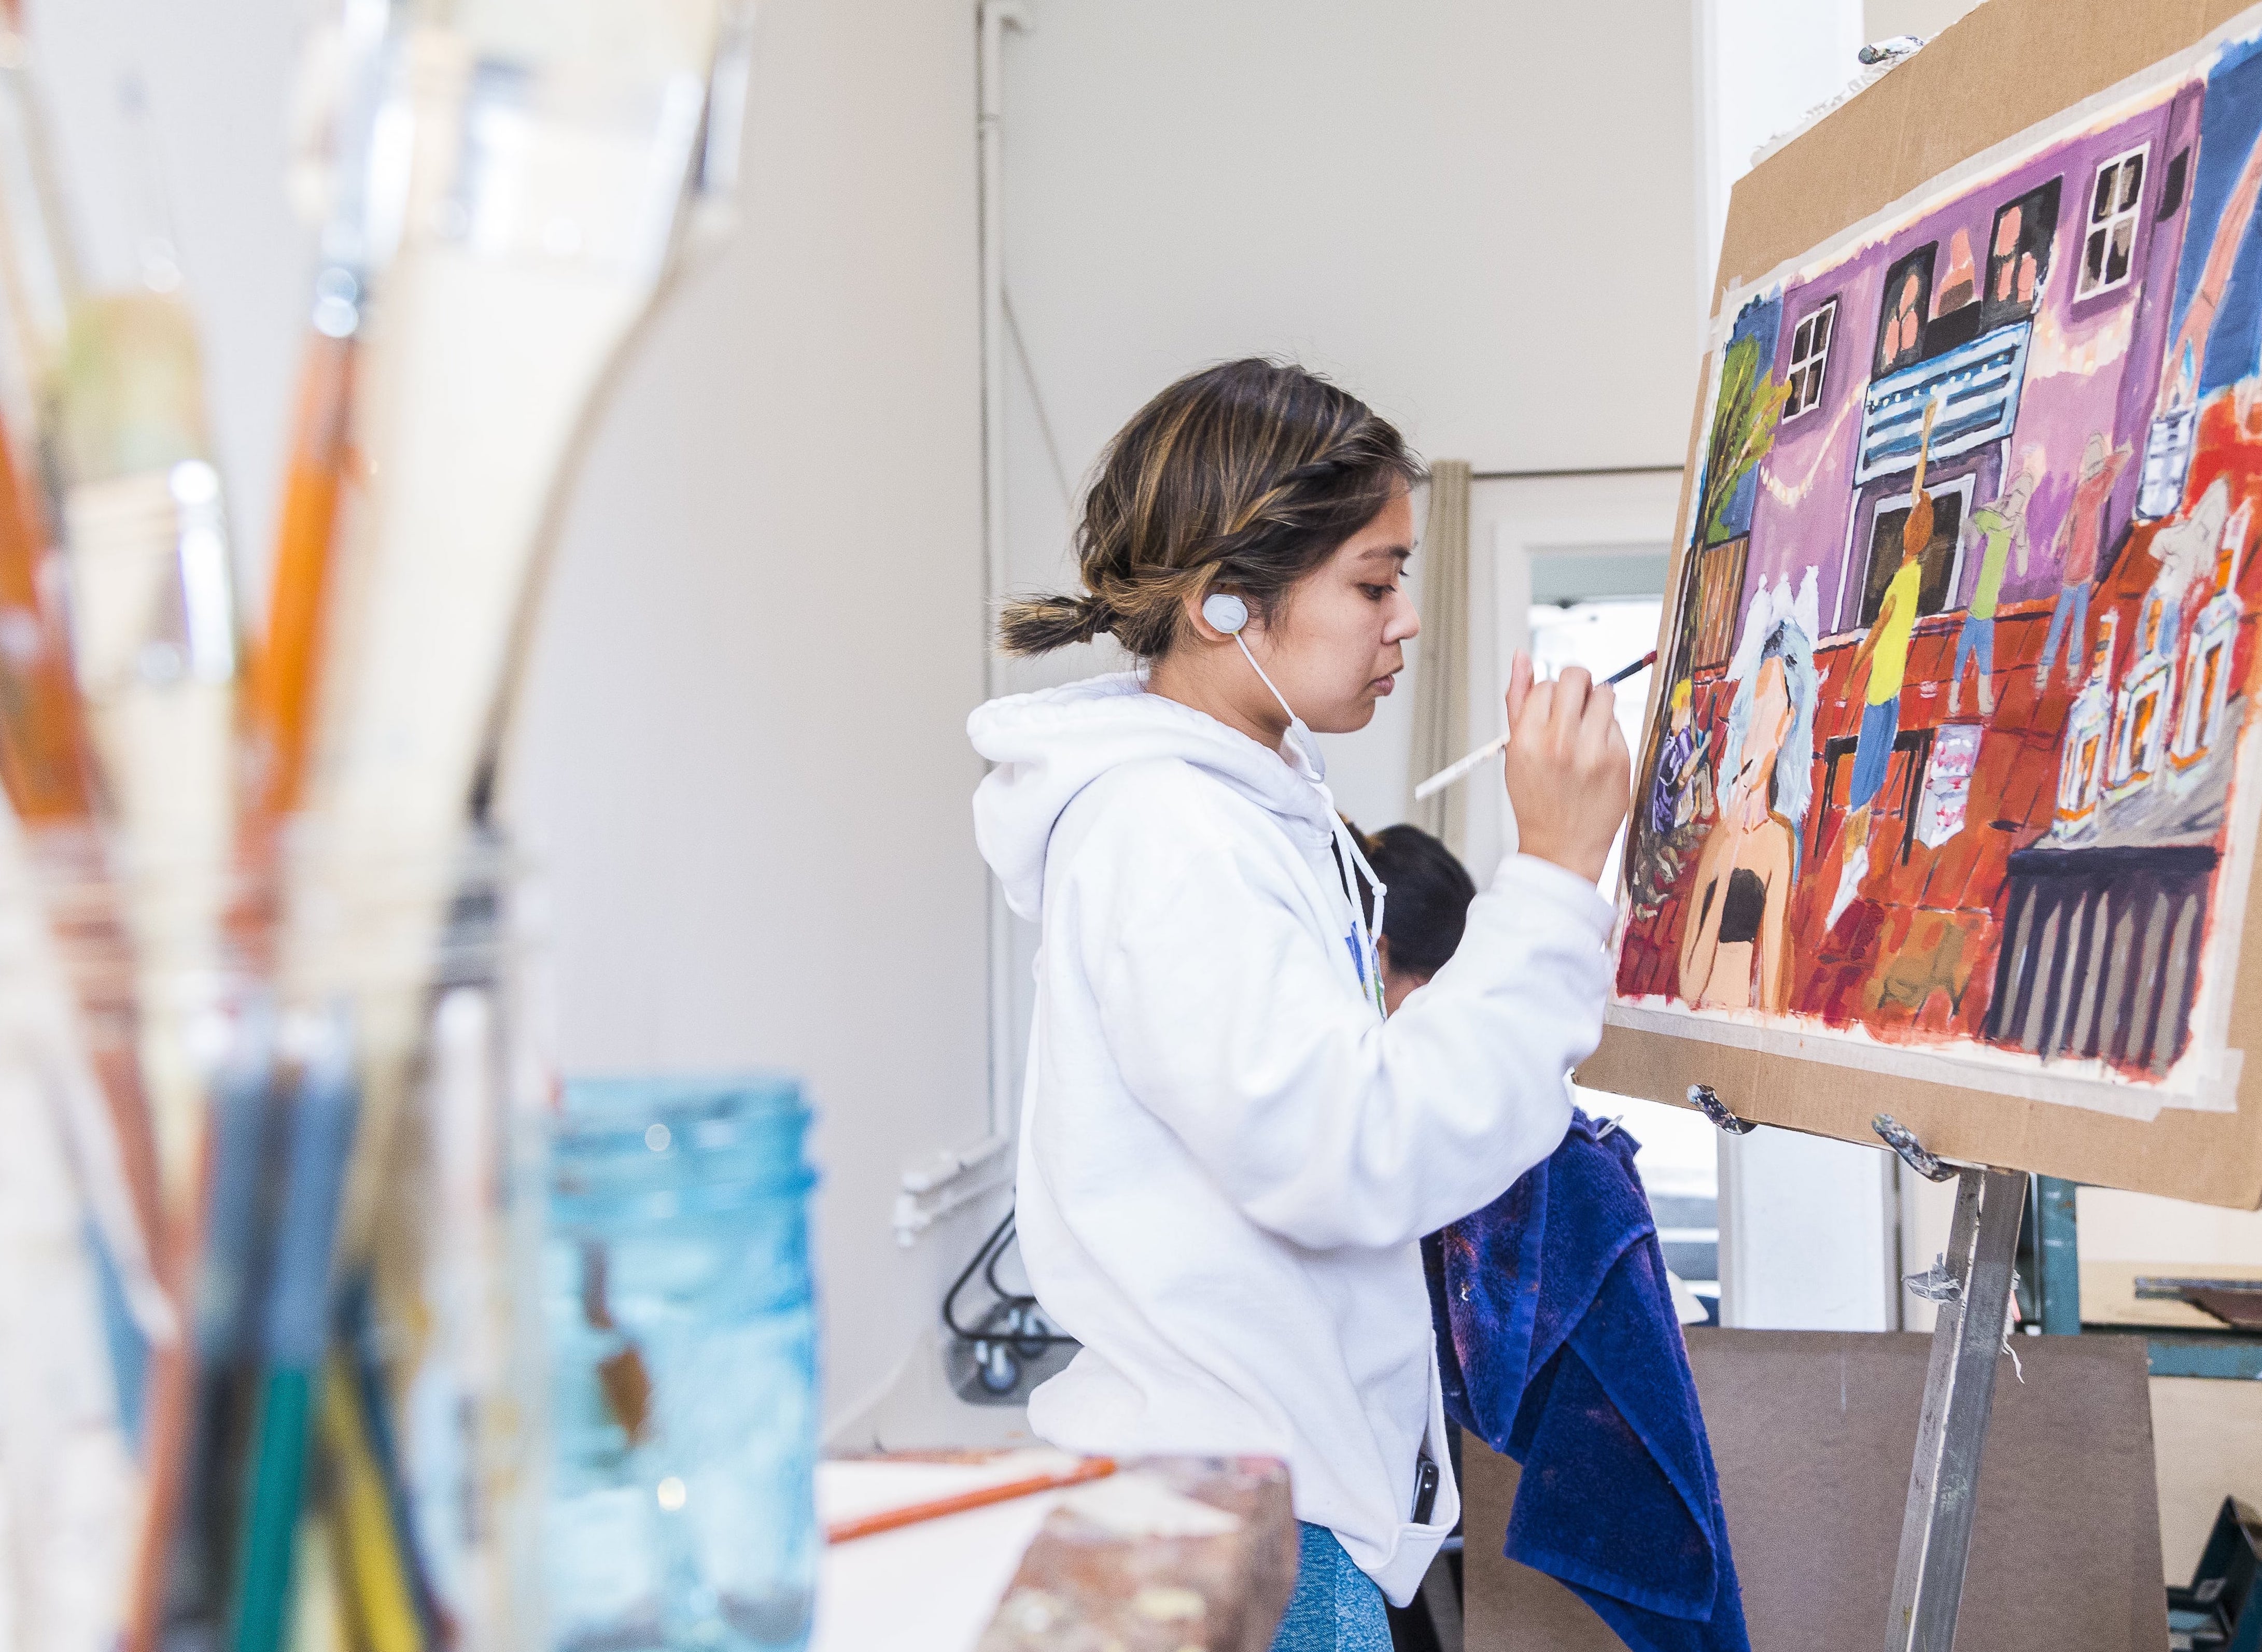 Woman painting on a canvas while being surrounded by art supplies